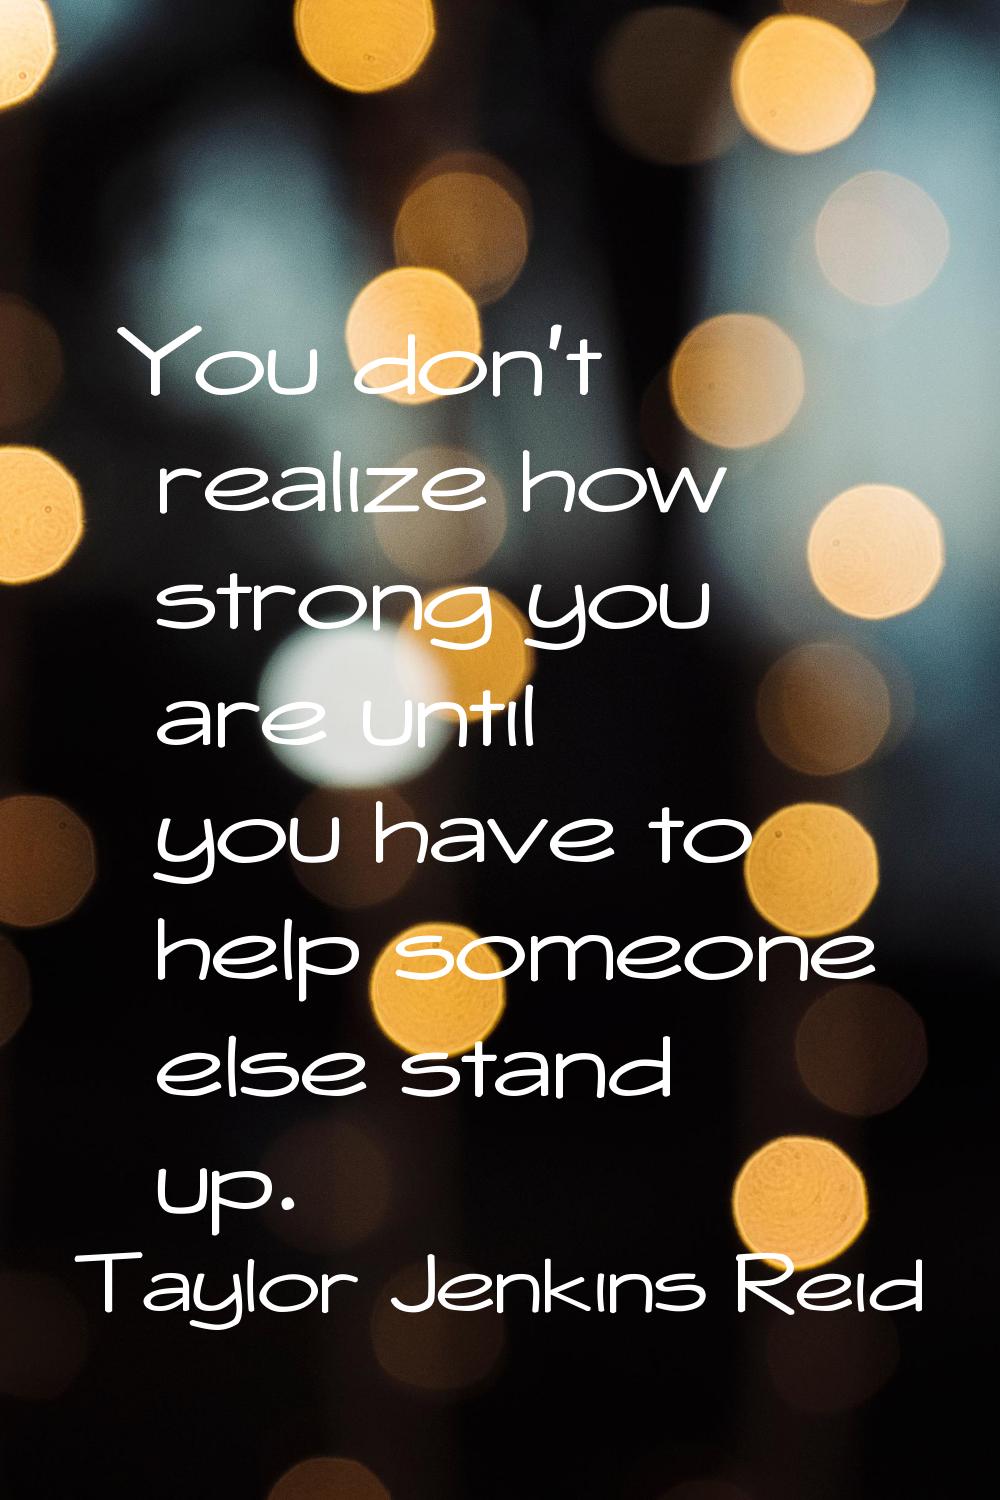 You don't realize how strong you are until you have to help someone else stand up.